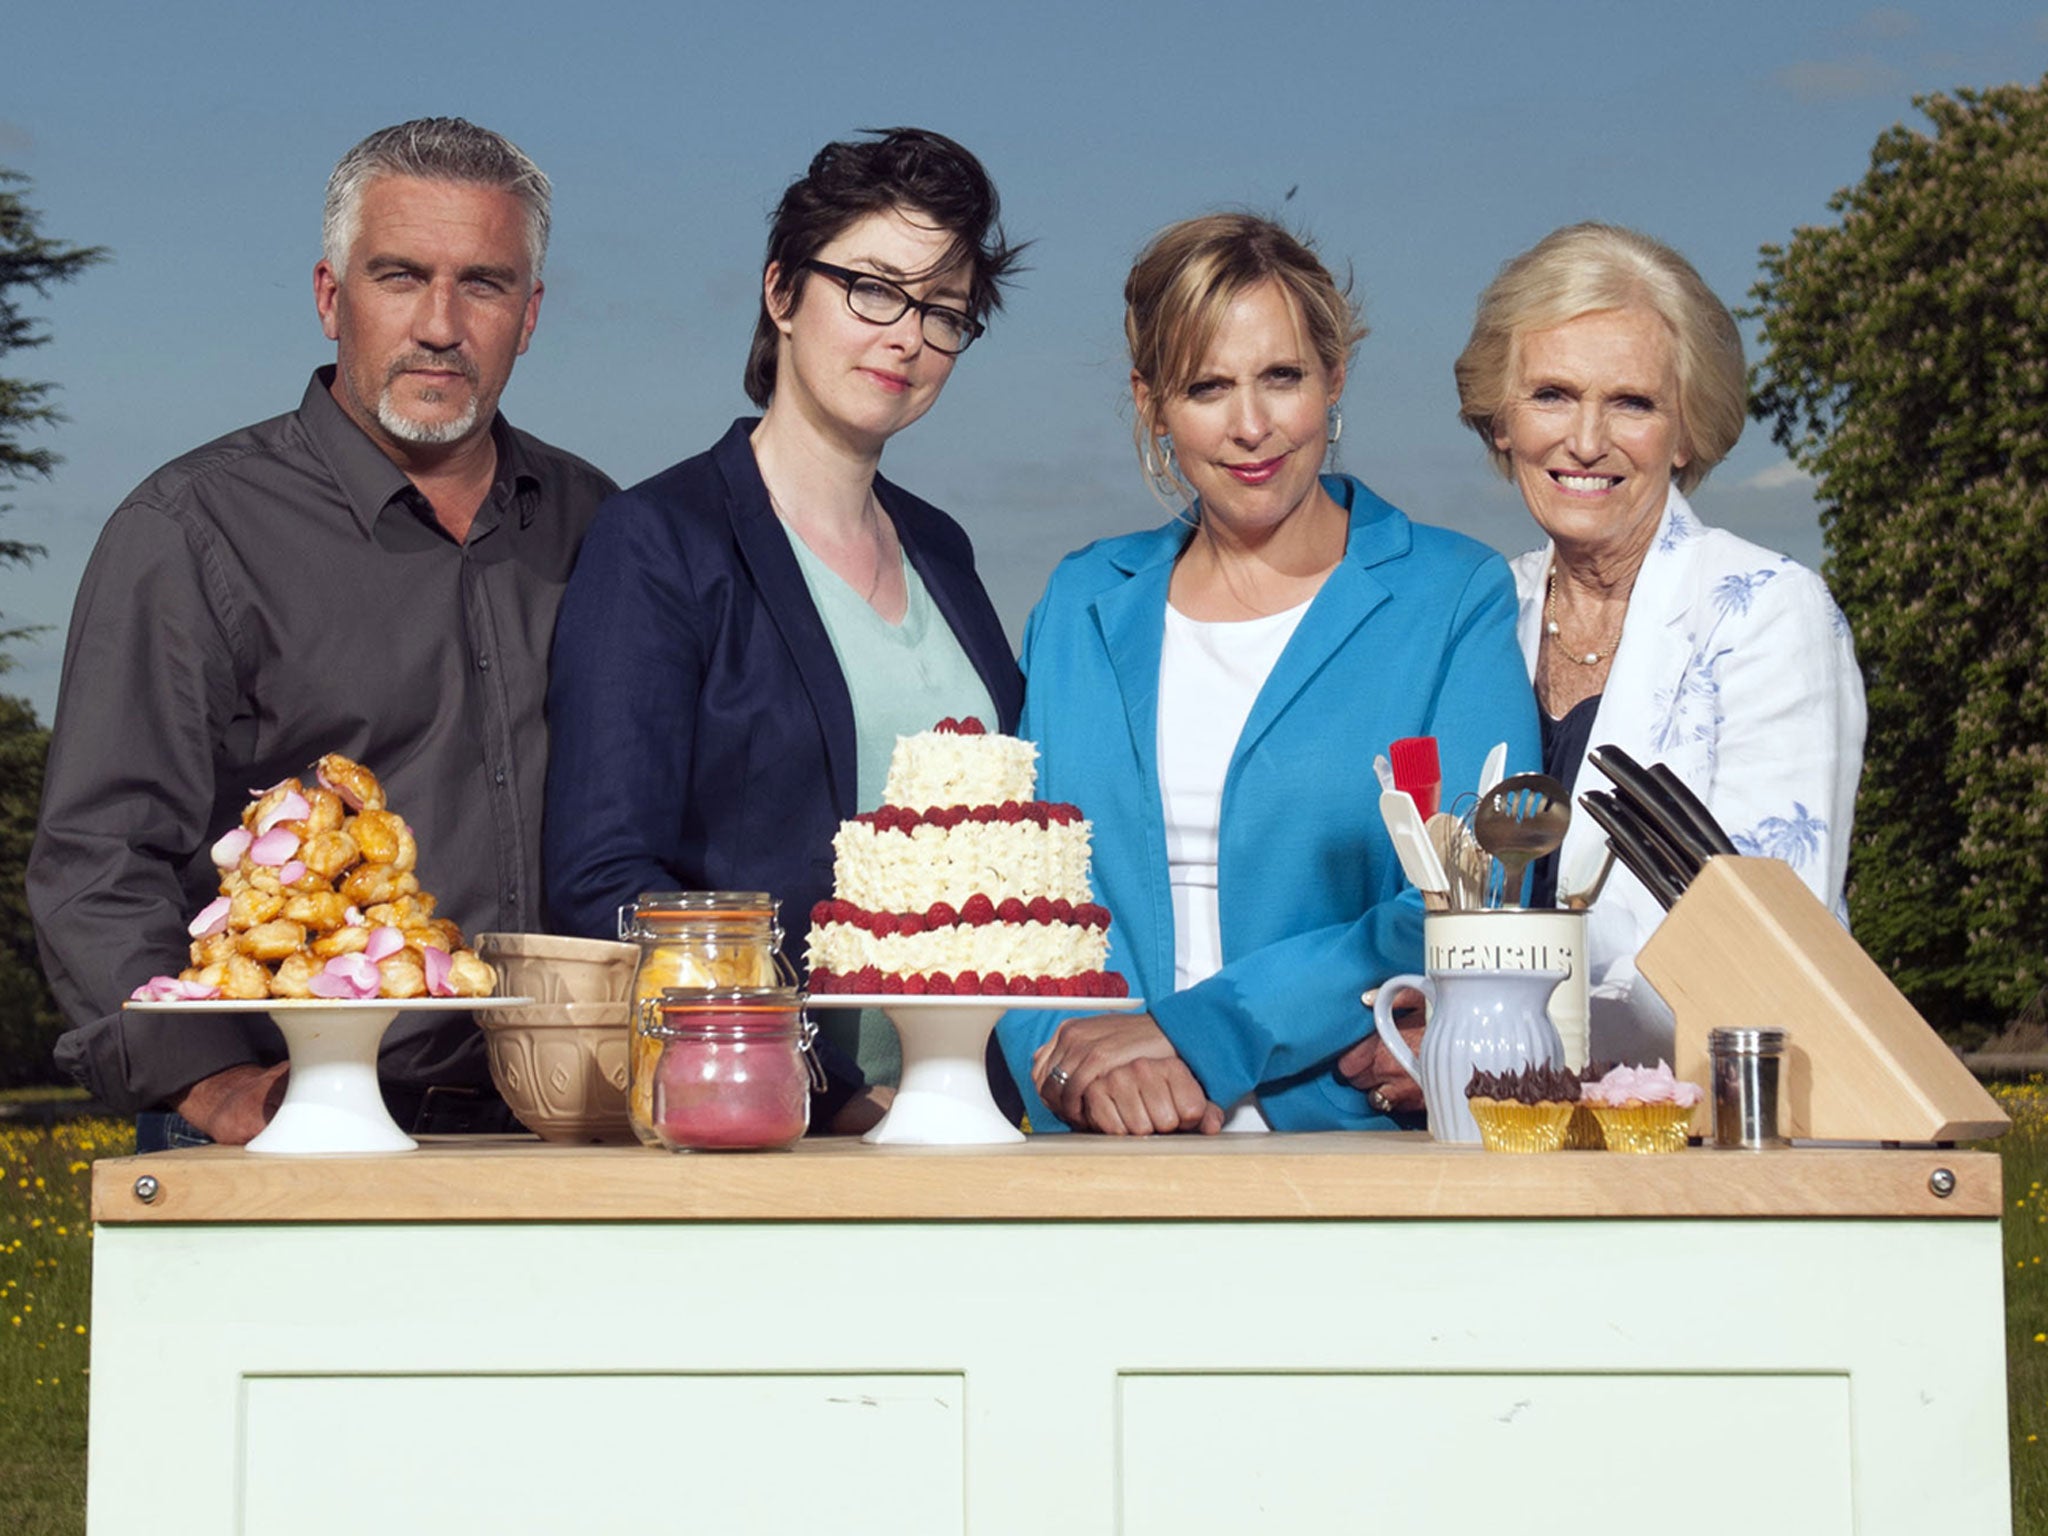 Sue Perkins and Mel Giedroyc, centre, are up for Best Female TV Comic for their presenting quips on The Great British Bake Off